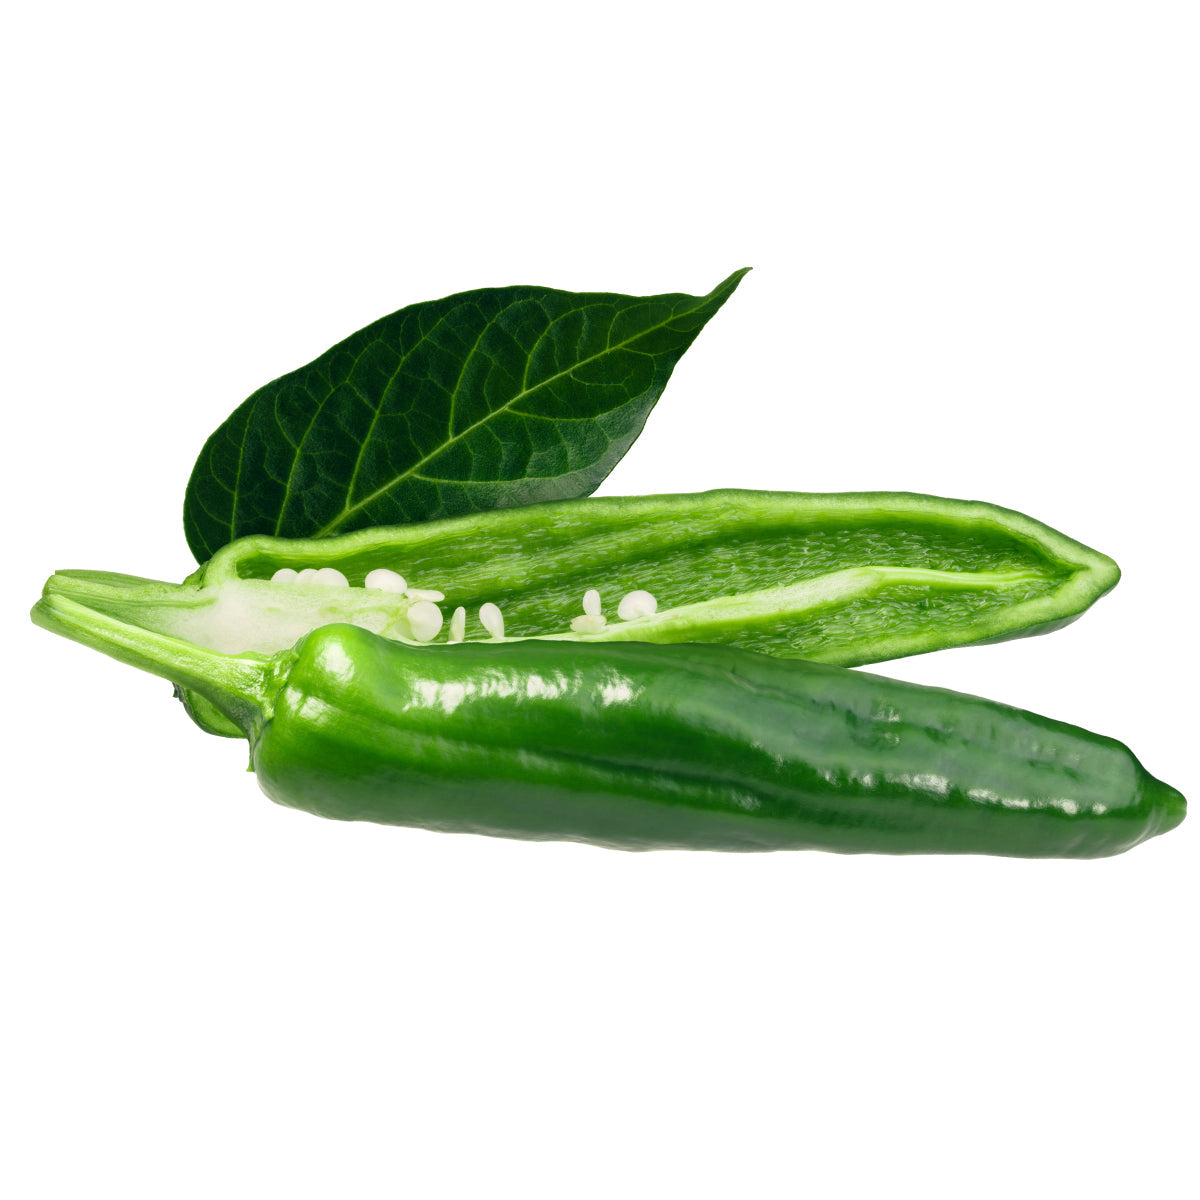 Numex 6-4 Pepper Seeds Novelty